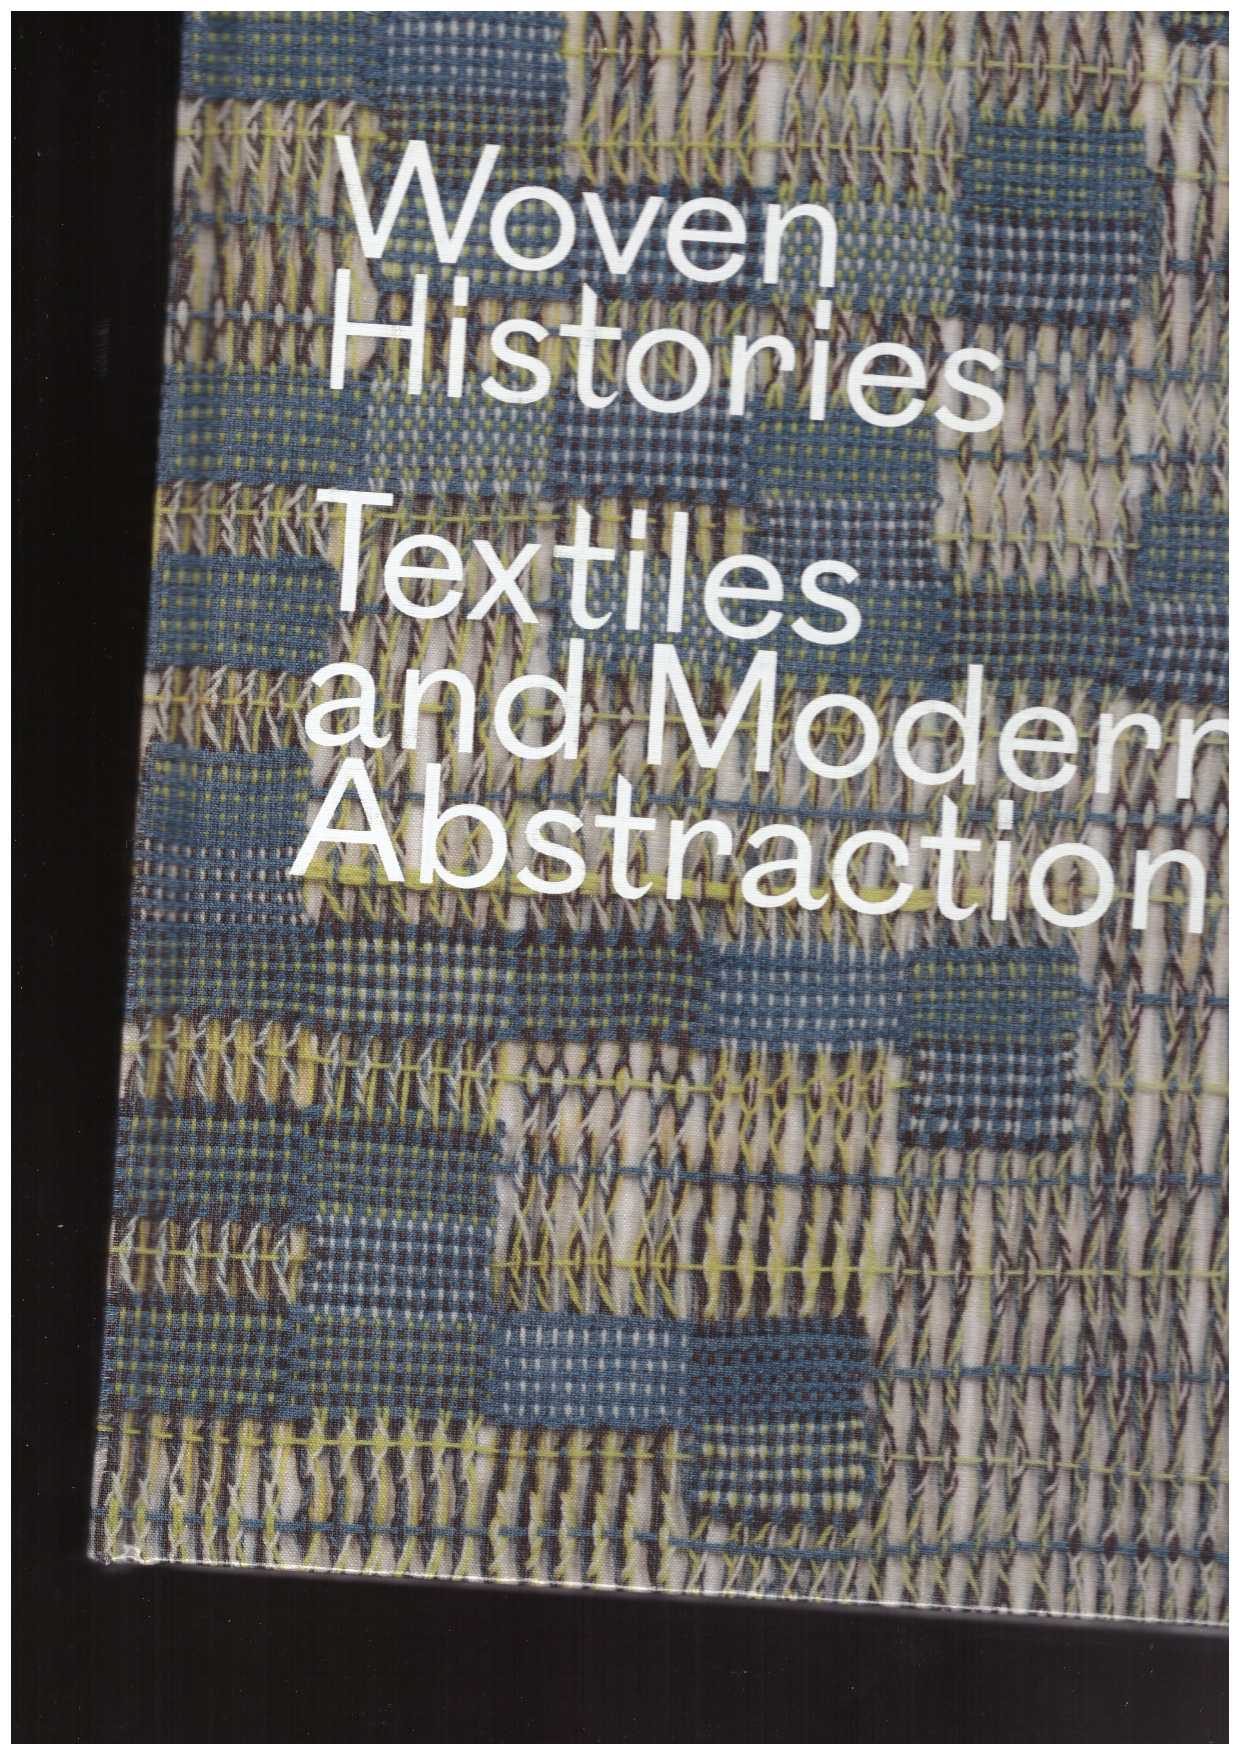 COOKE, Lynne (ed.) - Woven Histories: Textiles and Modern Abstraction